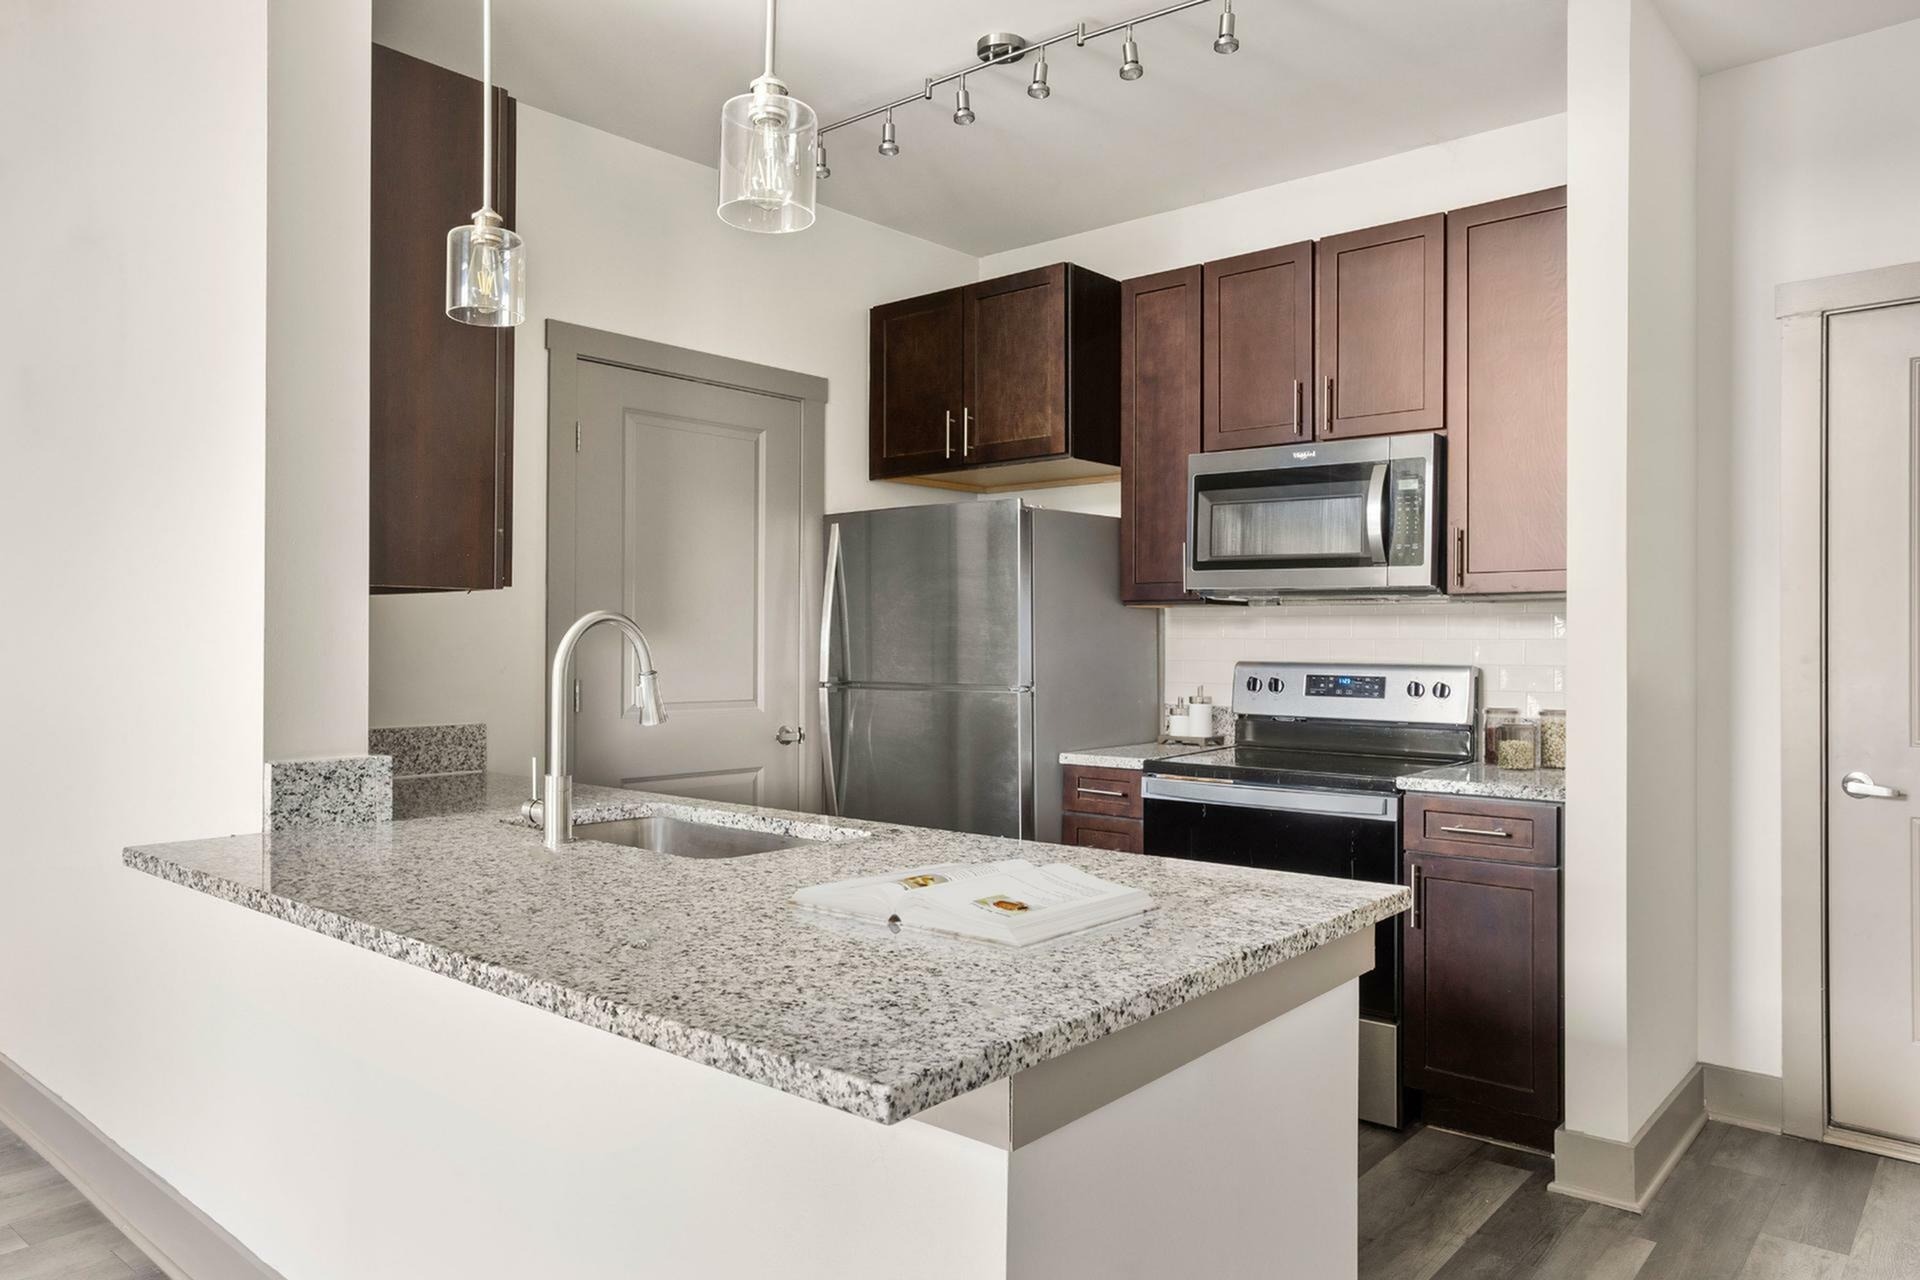 Kitchen | Apartments in Charlotte, NC | CityPark View